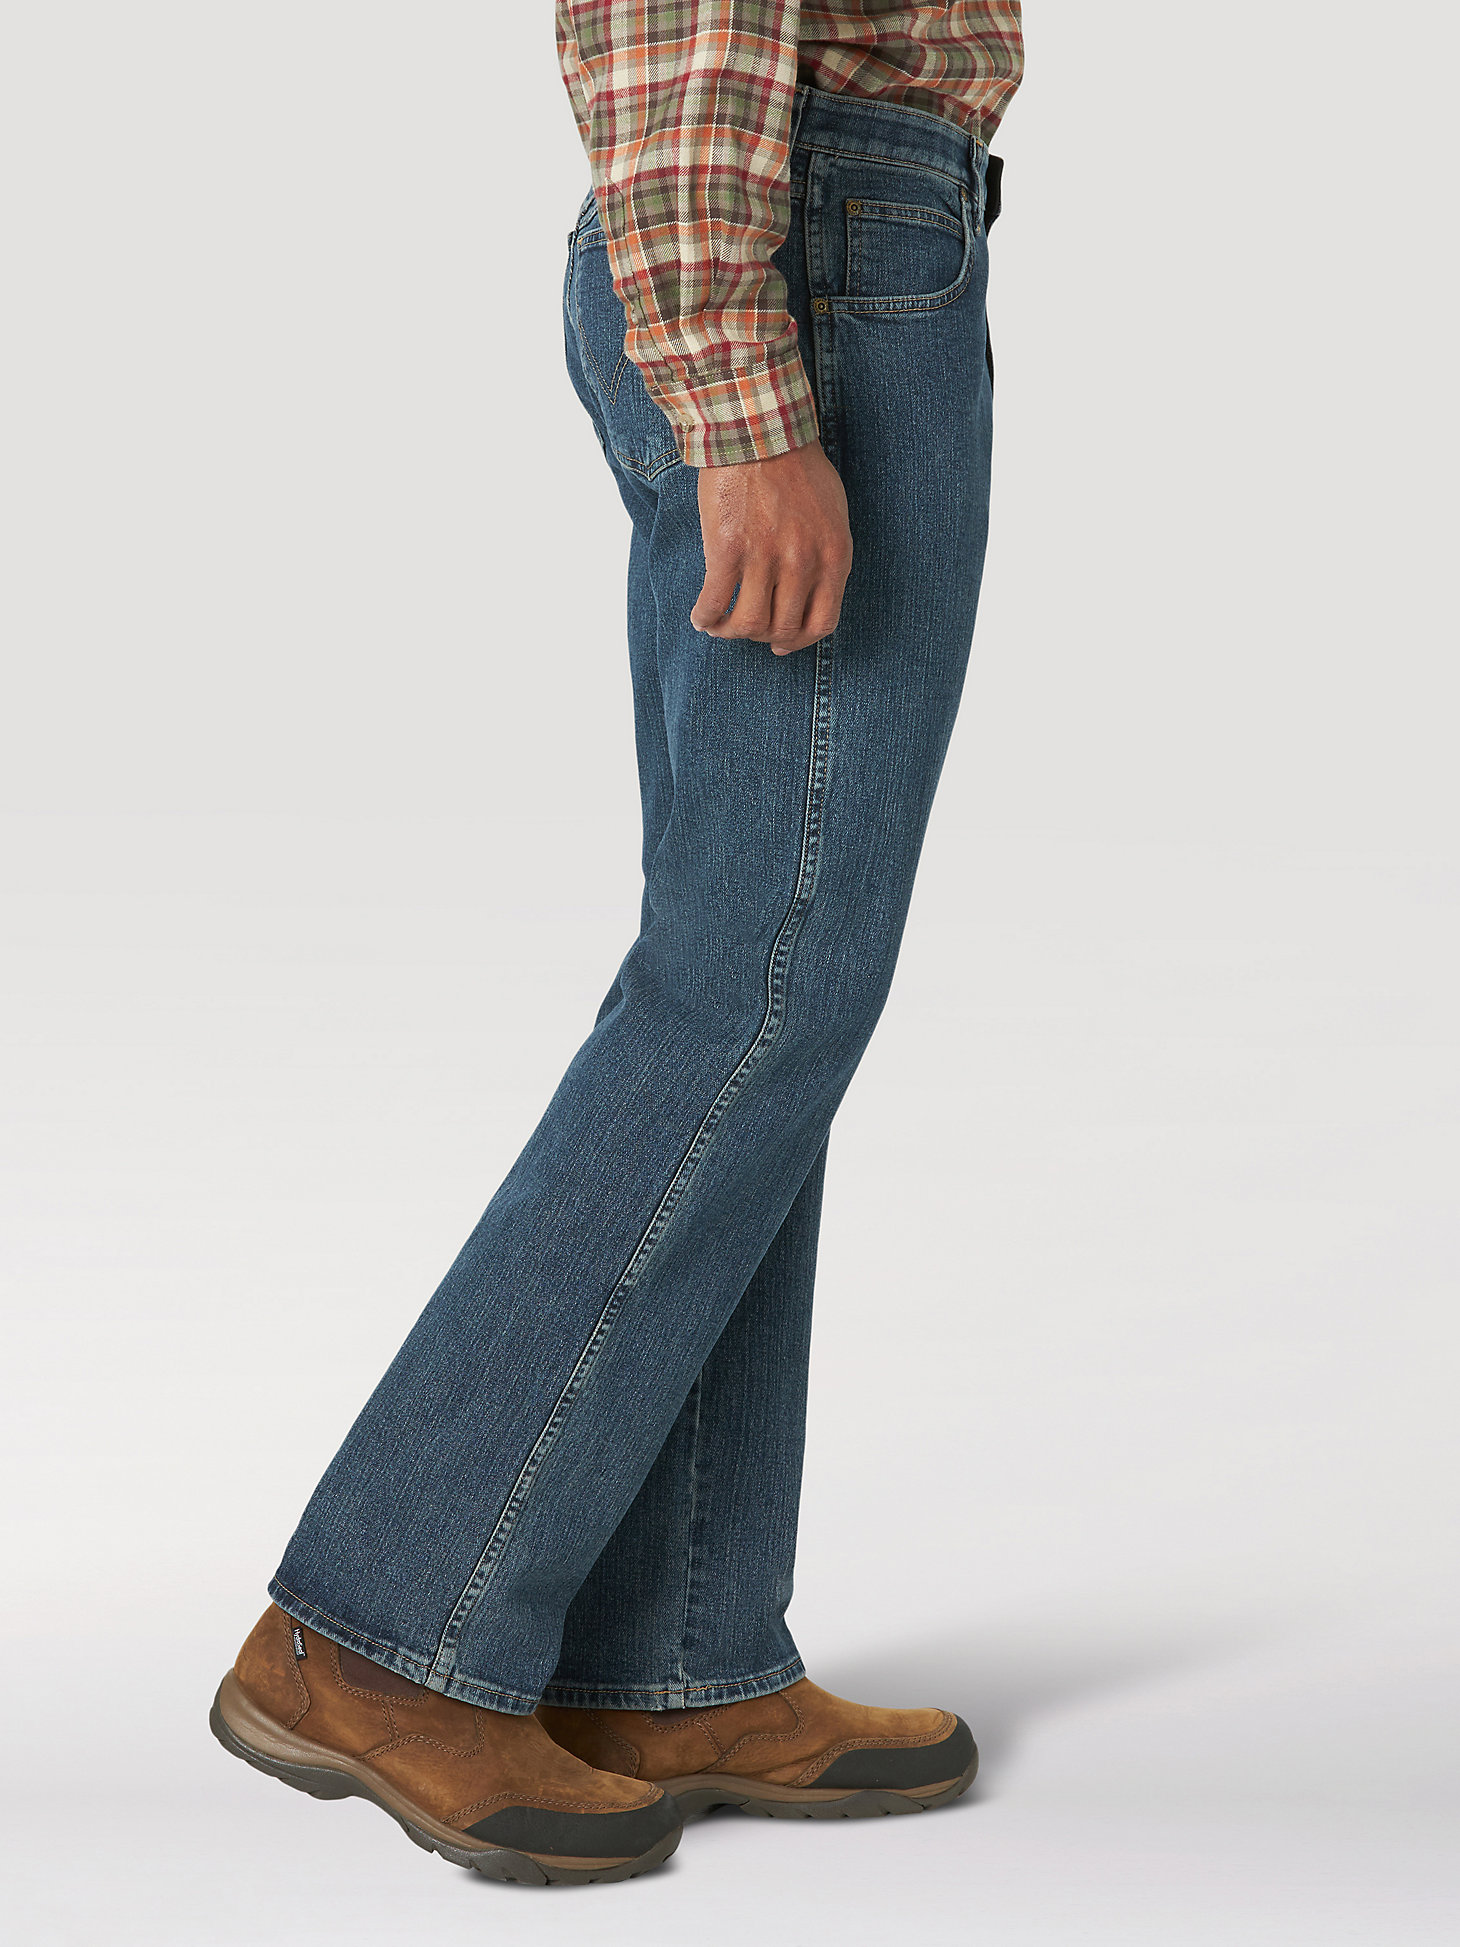 Wrangler Rugged Wear® Performance Series Relaxed Fit Jean in Mid Stone alternative view 1